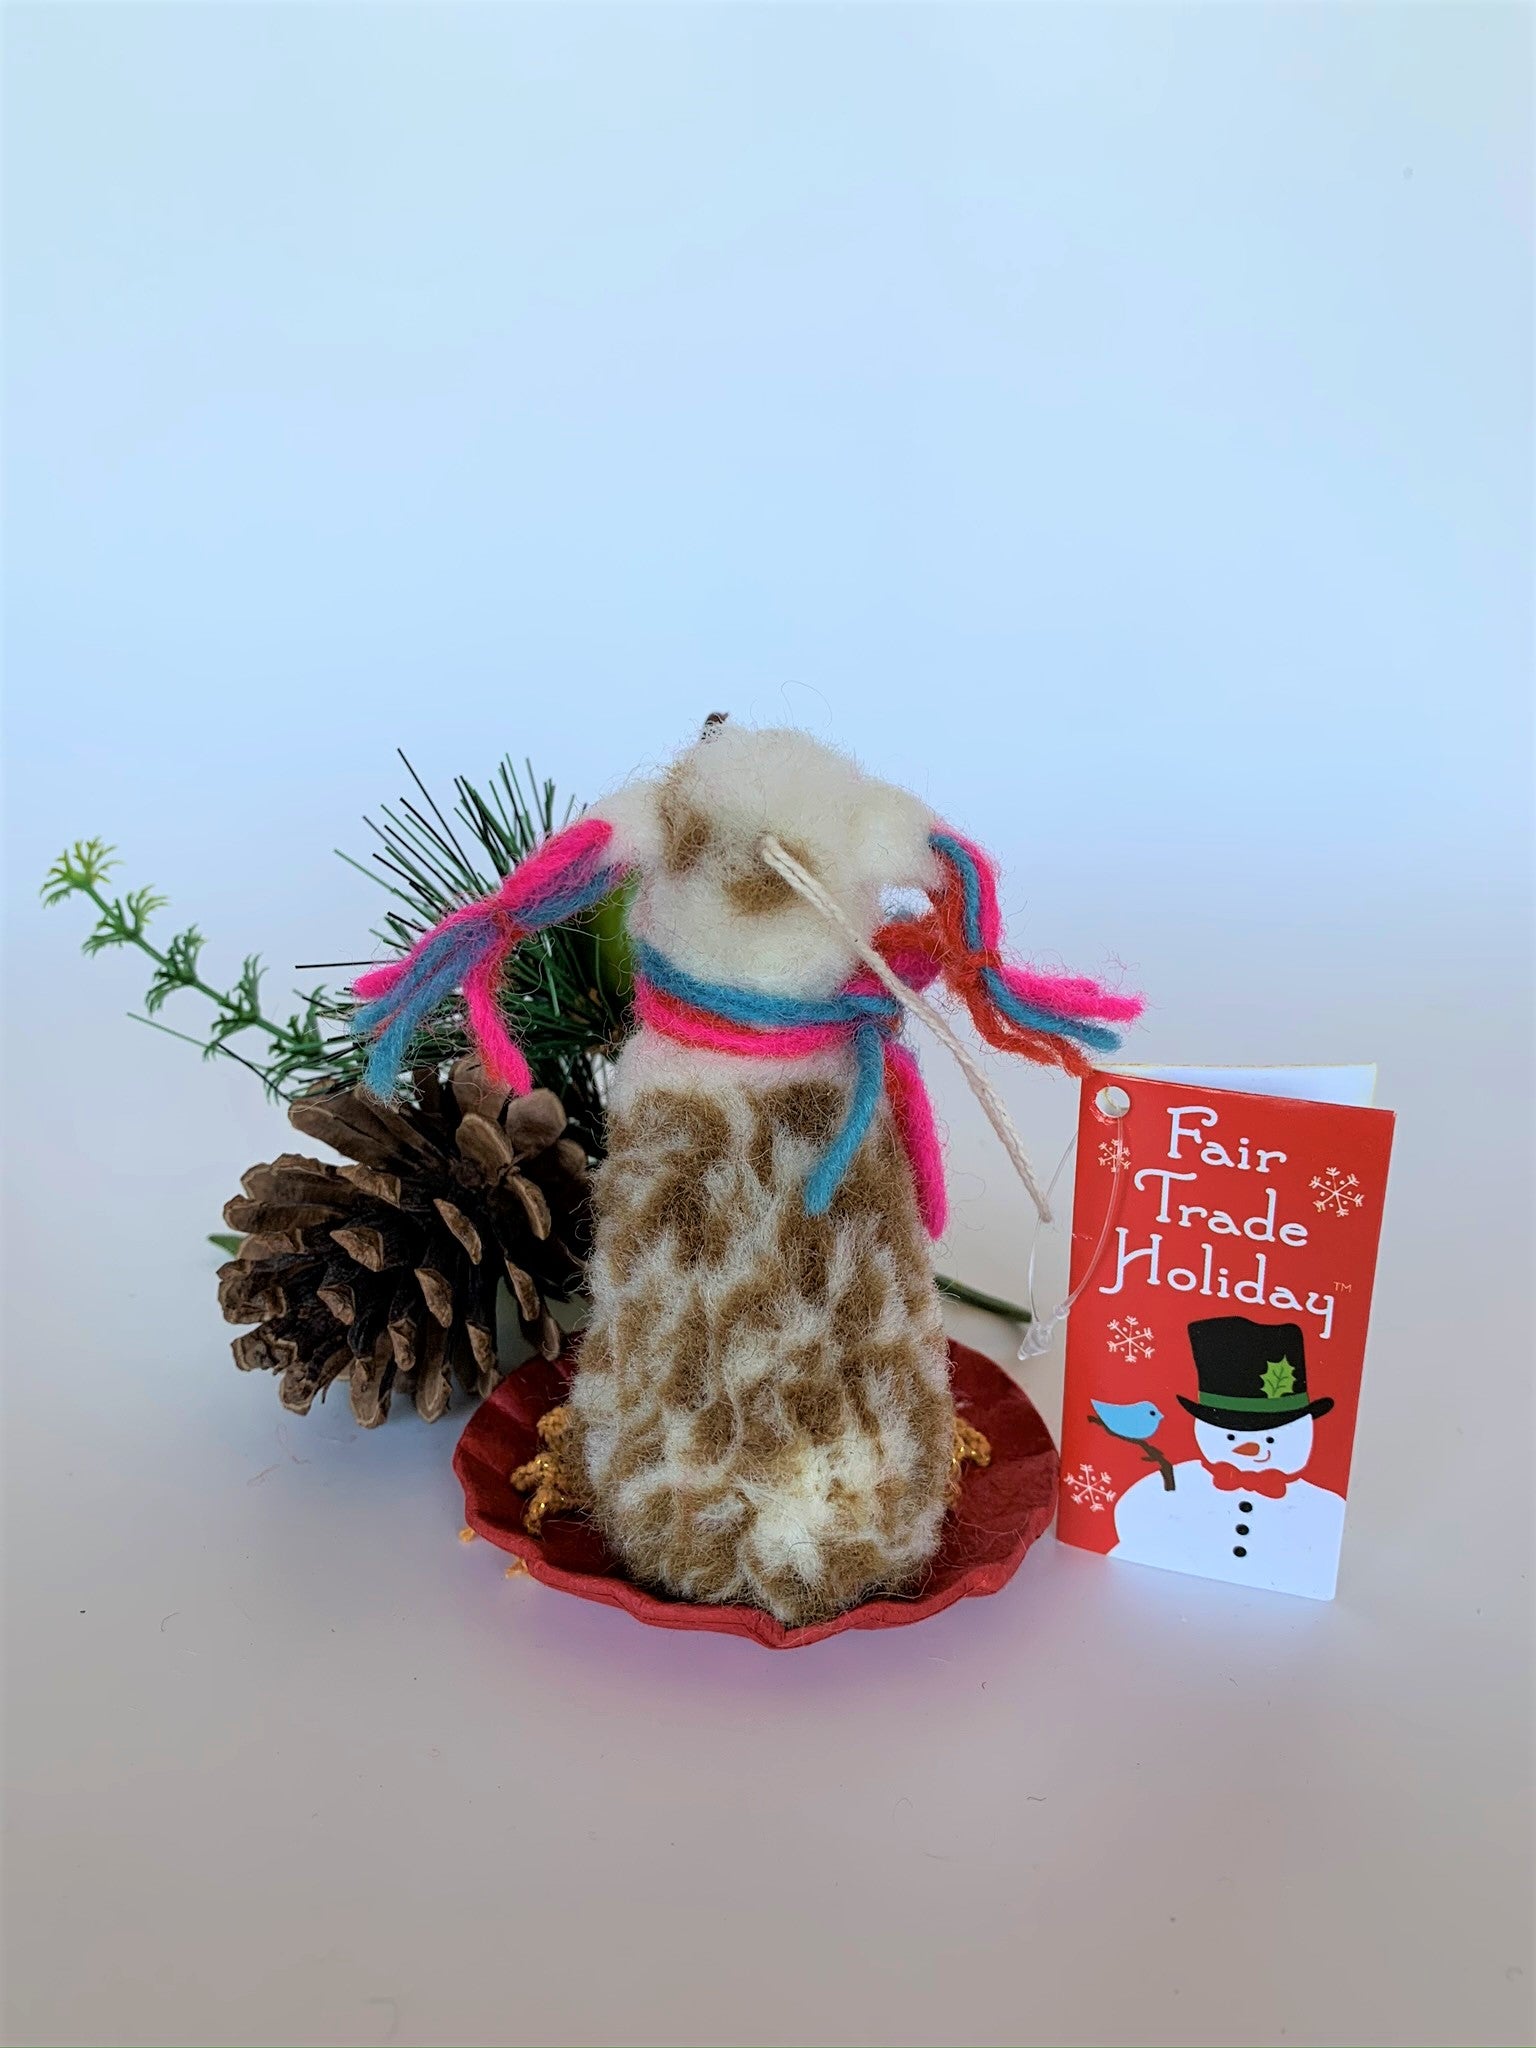 This is a back view of the sledding llama Christmas ornament that is handcrafted (fair trade) and is made of 100% natural, hand-felted wool. The sled is handmade using paper and feels something like very thin wood. The llama is furry, off-white and brown, with black accents (hooves, facial features), sits on a round red sled and wears a scarf made of colorful (red, blue and pink) yarn. The same yarn is used for accents on its ears. Approximately 4.5"x2.75"x2.75".